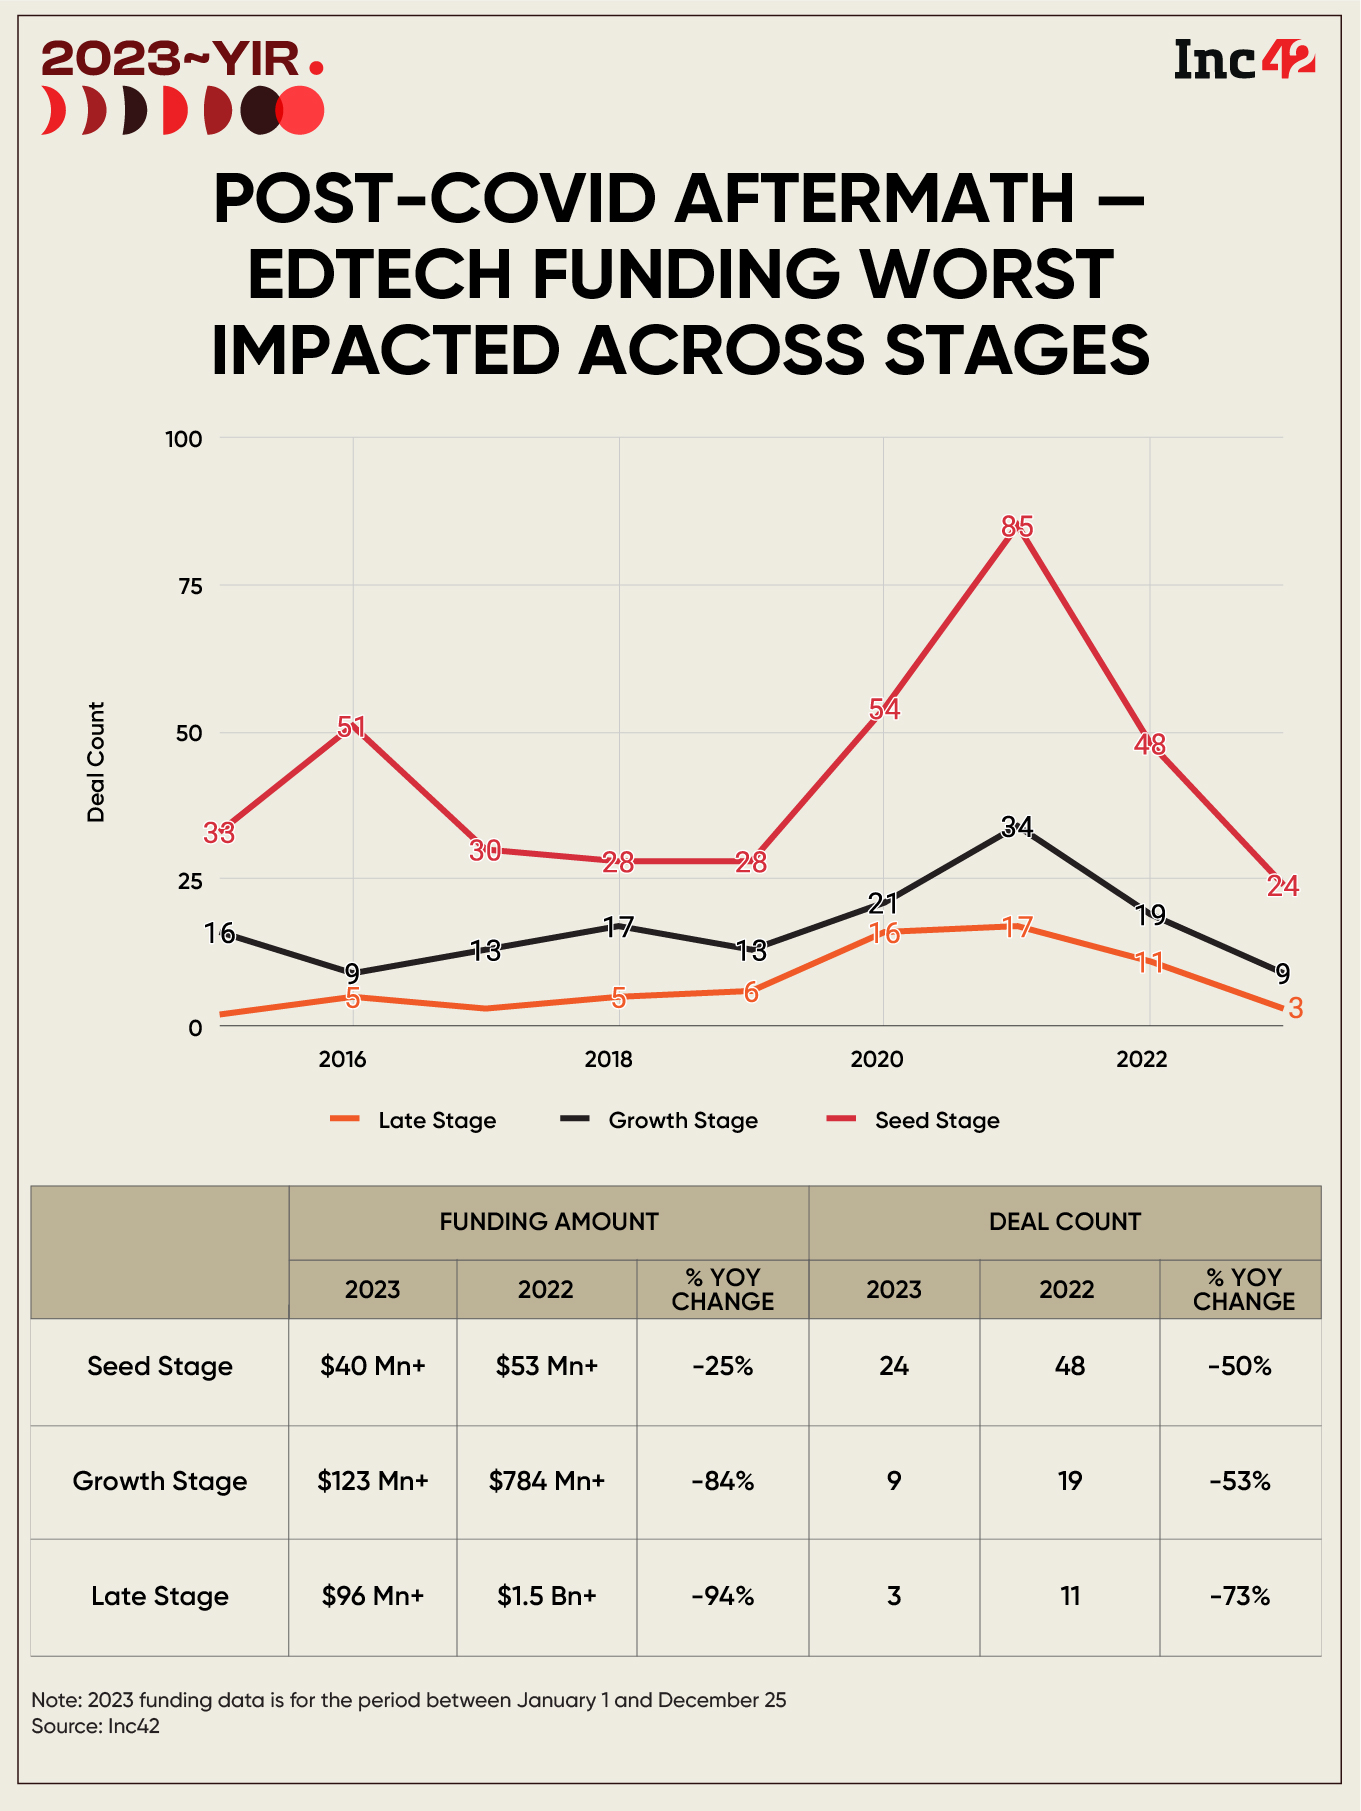 Late Stage Startups Critical As Edtech Funding Fell 88% In 2023